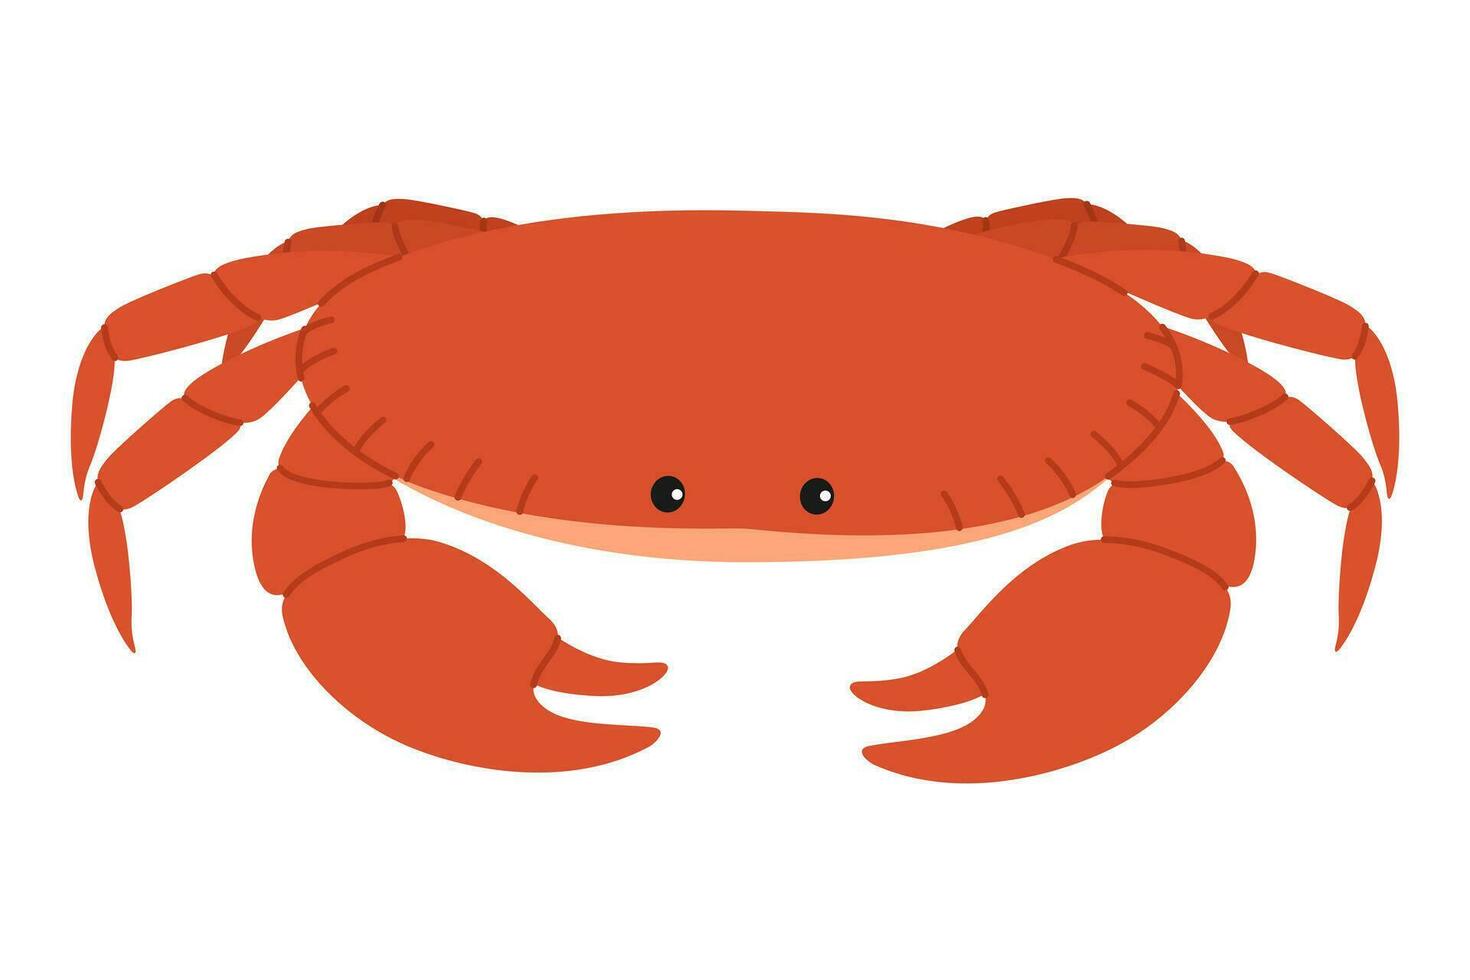 Cute orange crab. Sea and ocean animal. Underwater life. Childish shellfish character. Vector flat illustration isolated on white background